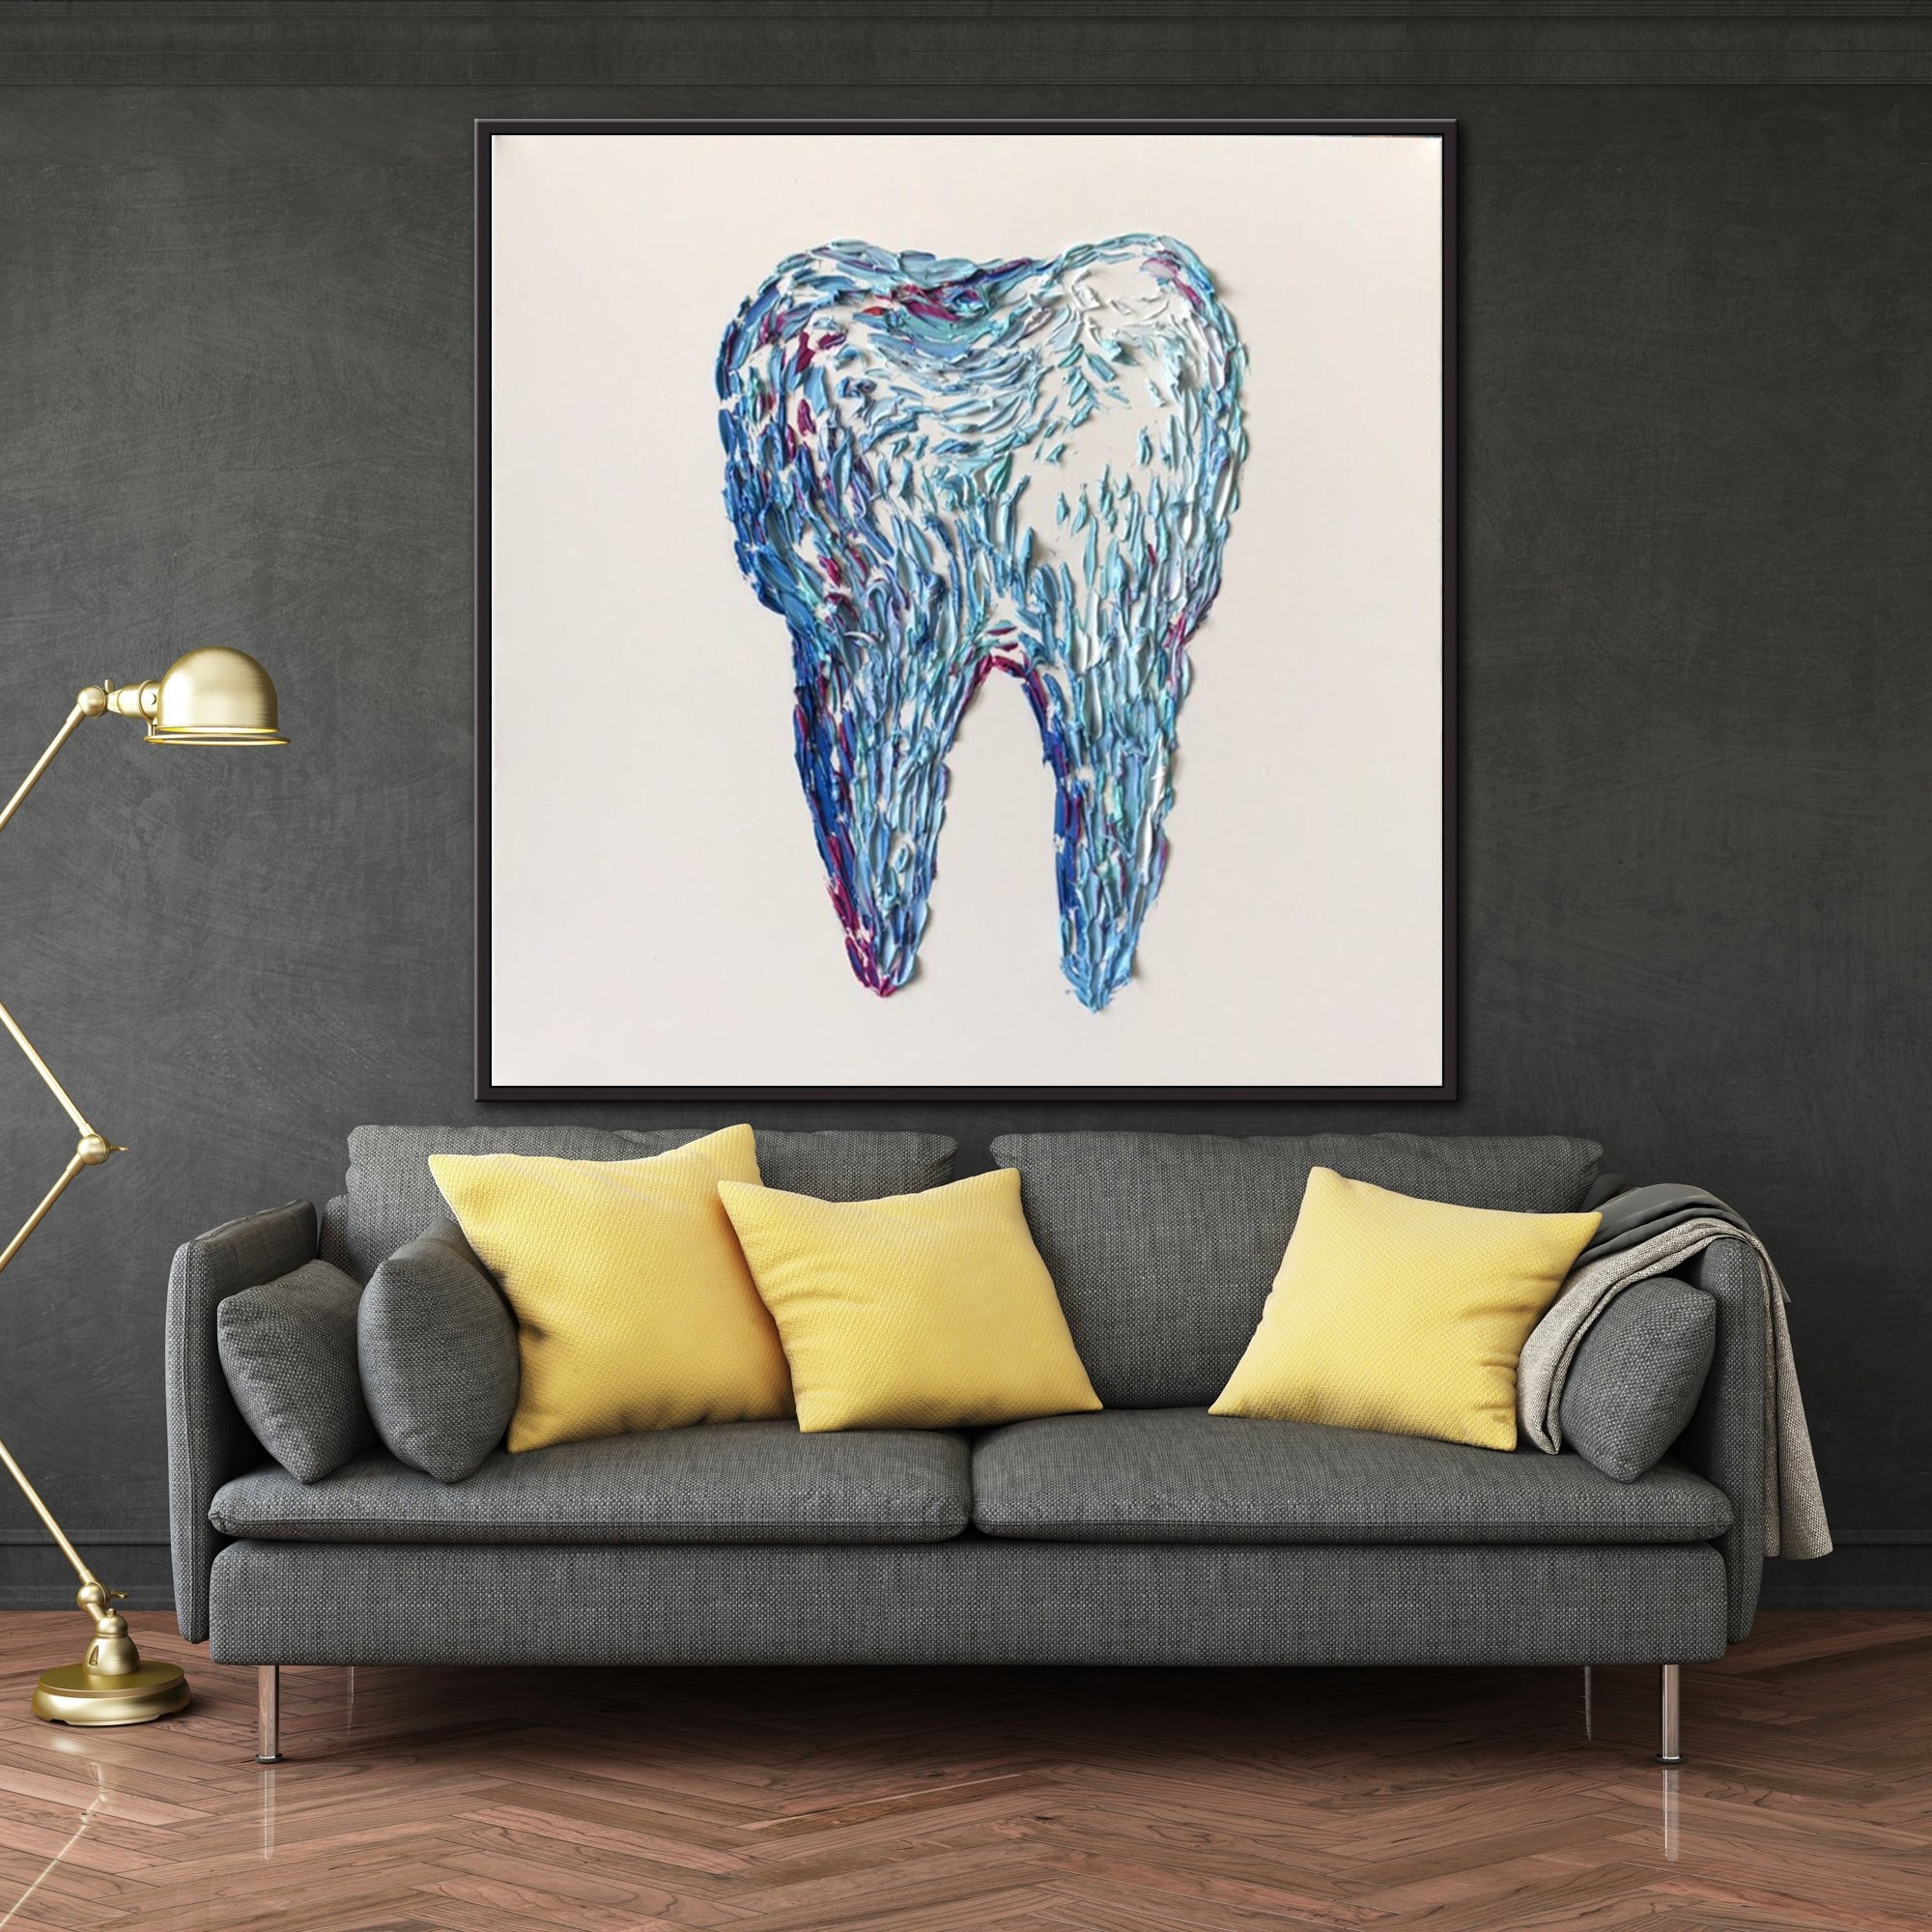 Oversized Oil Painting Dental Art Medical Wall Art Tooth Etsy